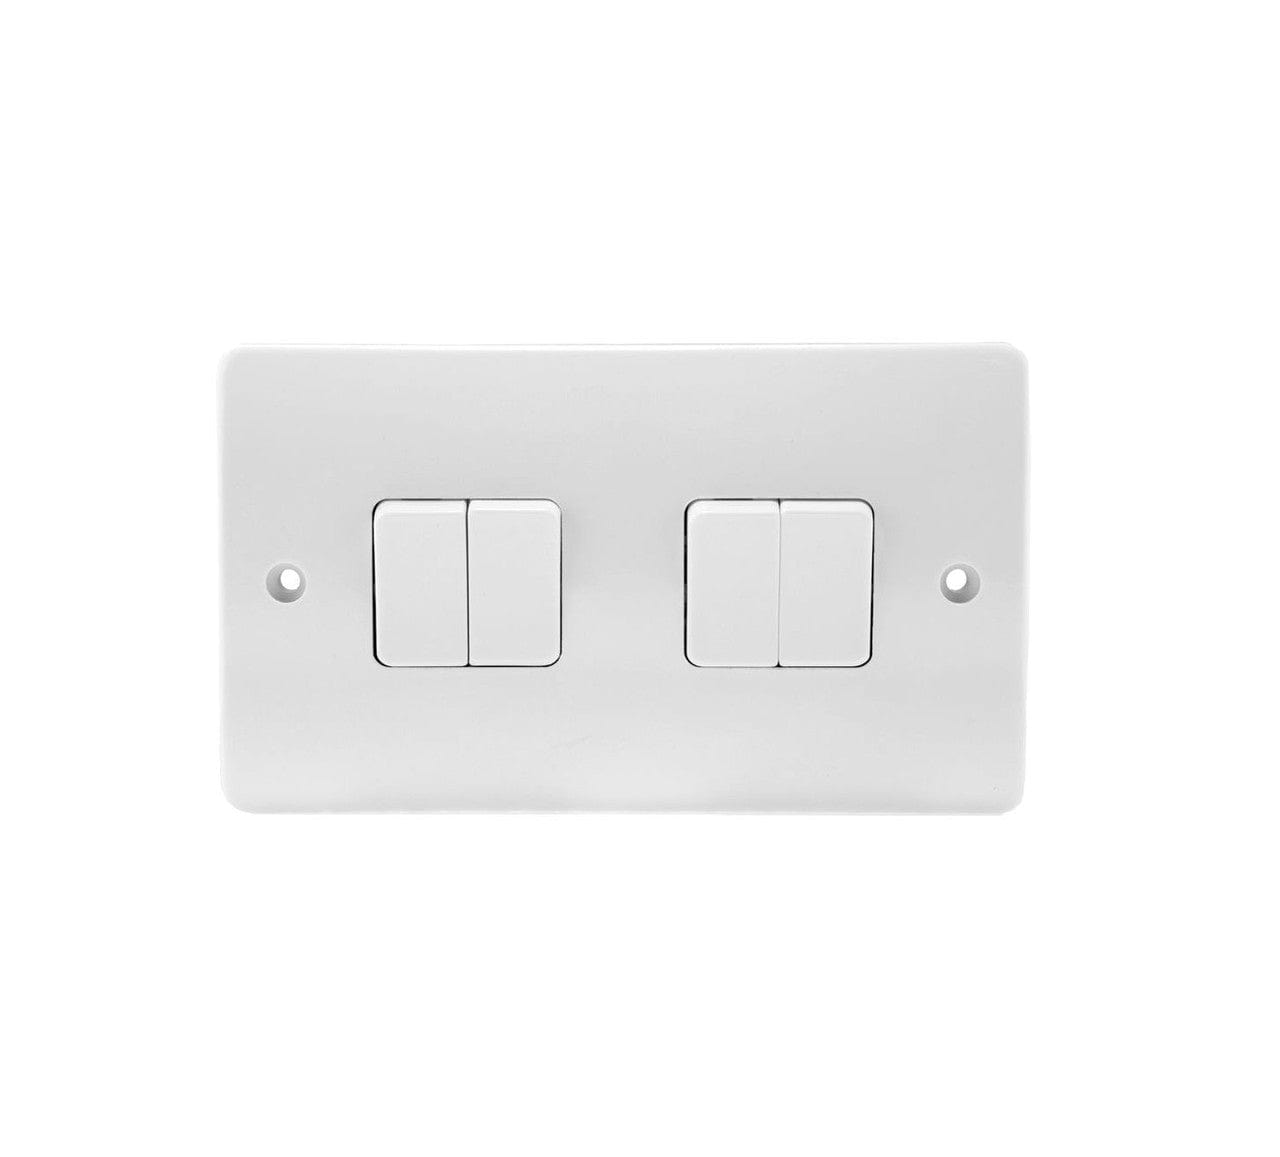 MK Electric 10A 4-Gang 2-Way Light Switch | Supply Master | Accra, Ghana Switches & Sockets Buy Tools hardware Building materials